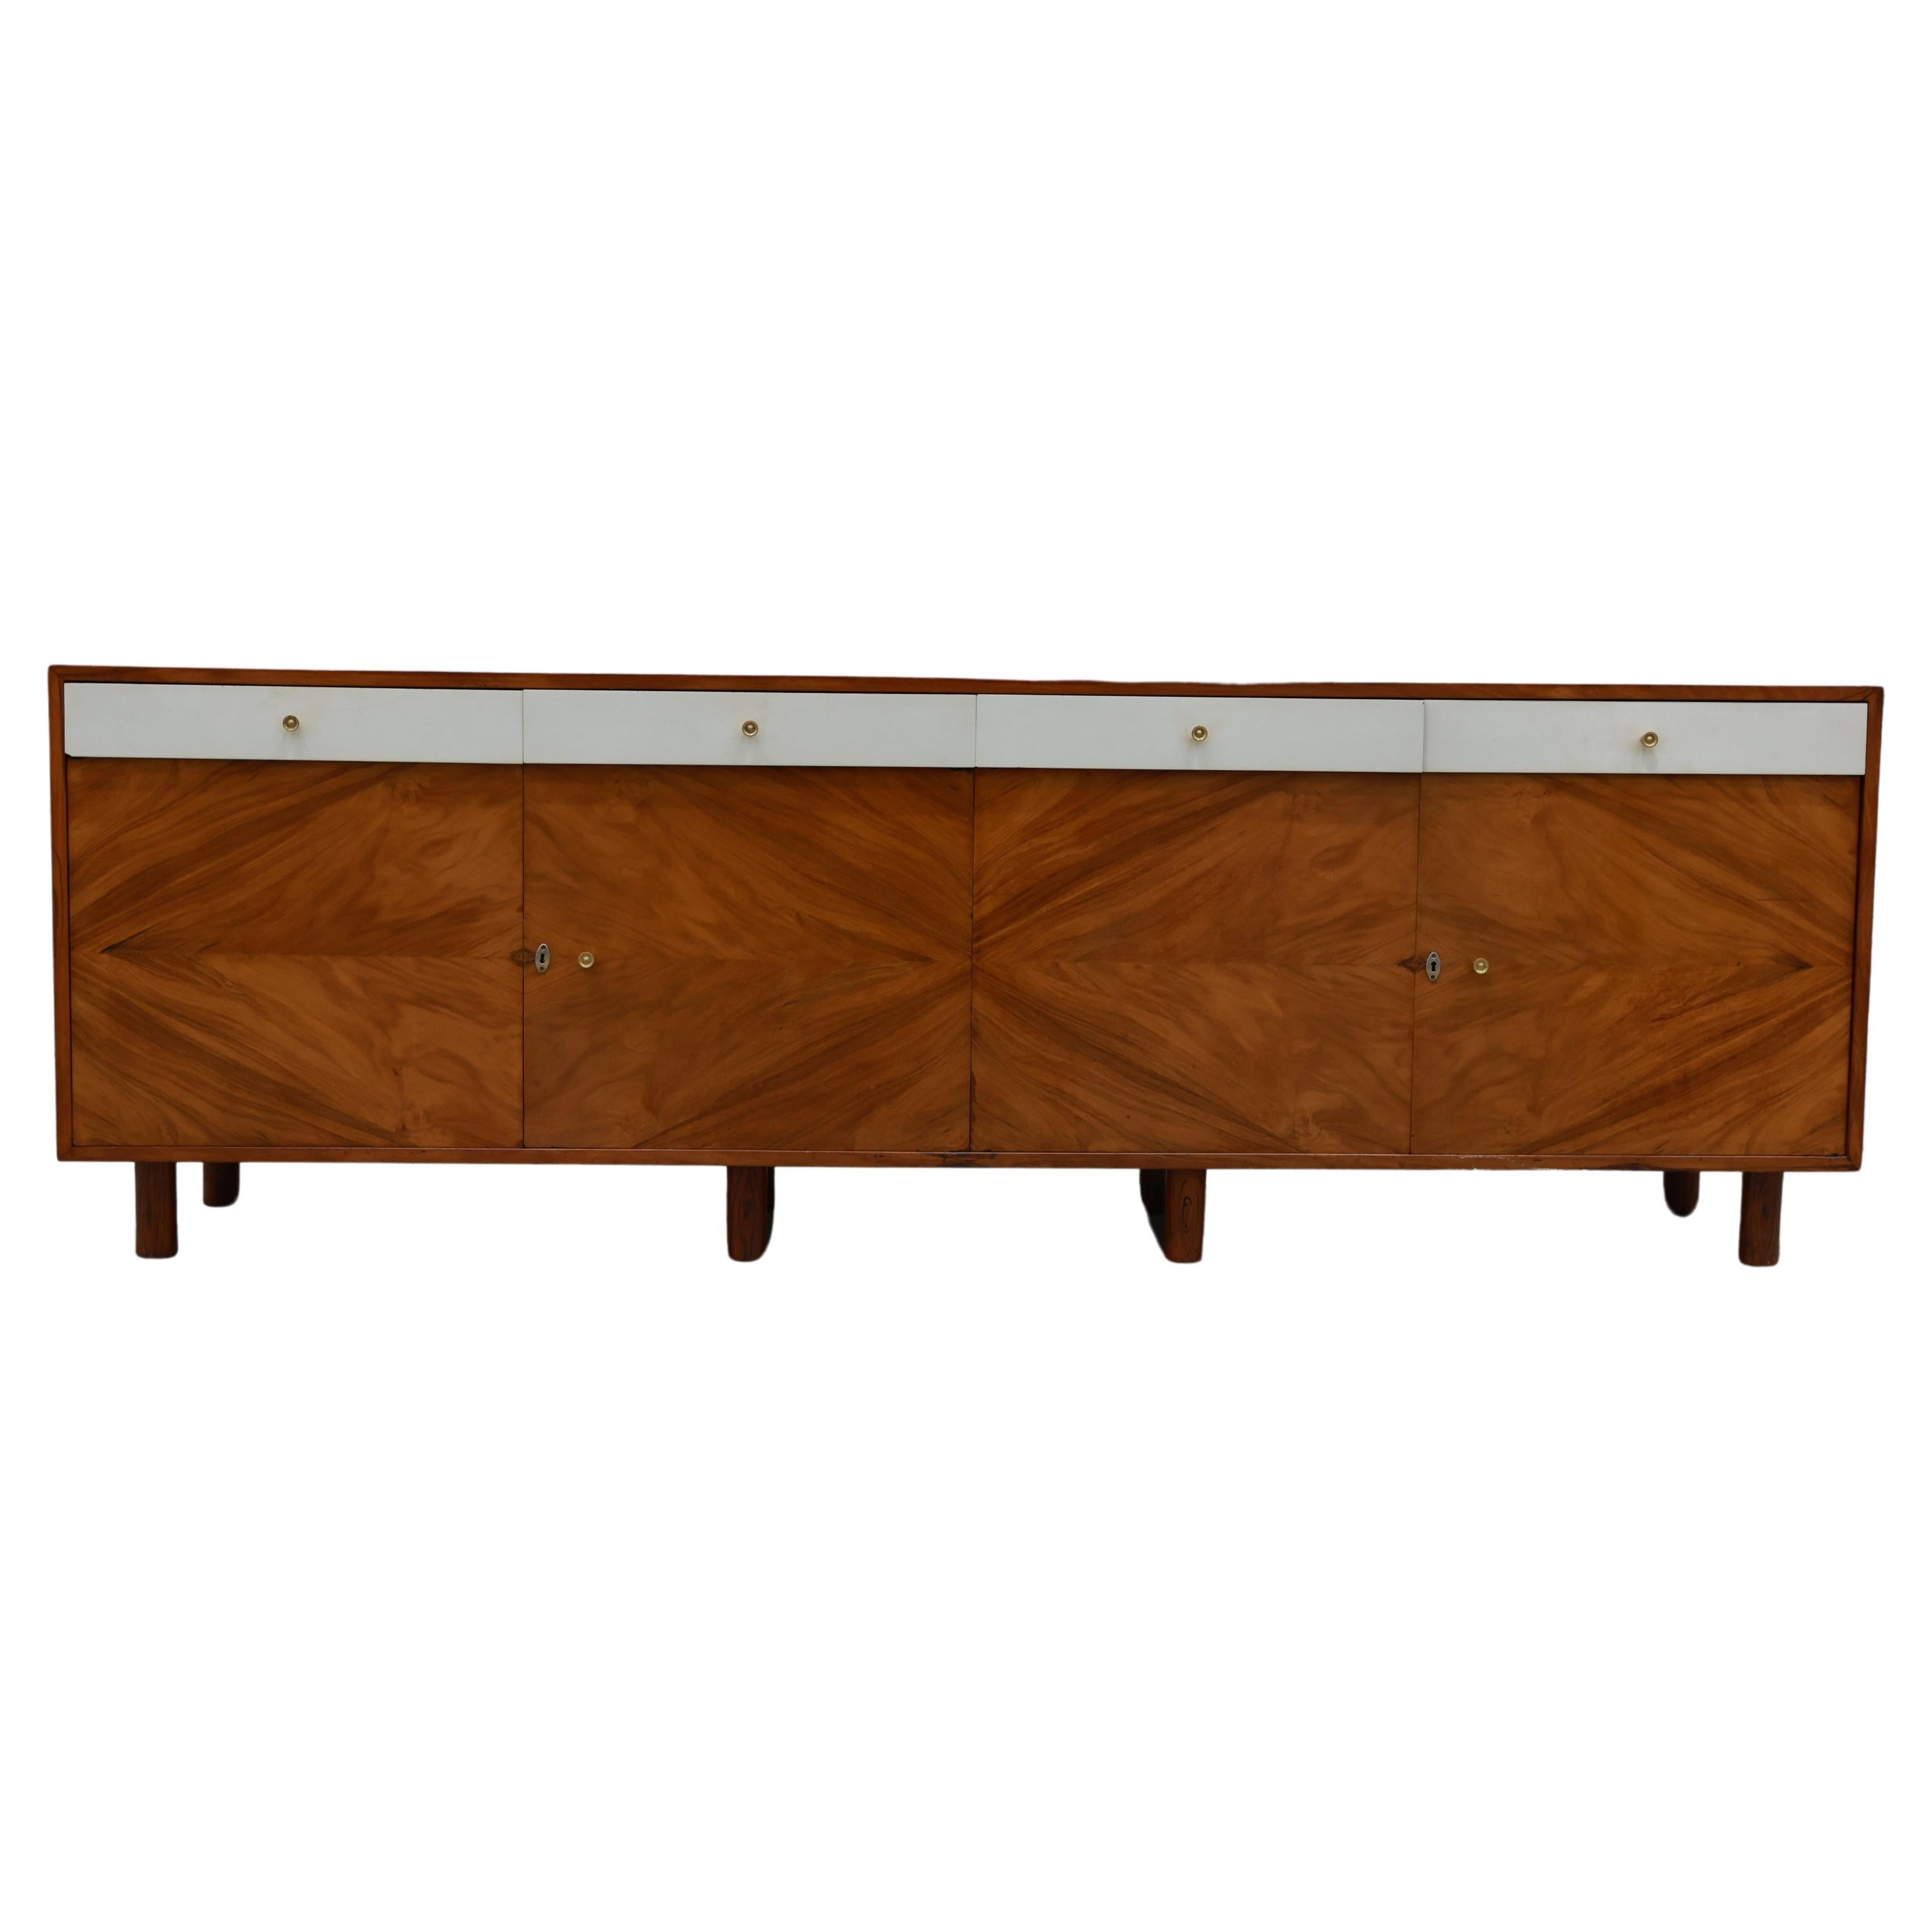 Credenza in Hardwood and Brass, Ernesto Hauner for Mobilinea, c. 1960s For Sale